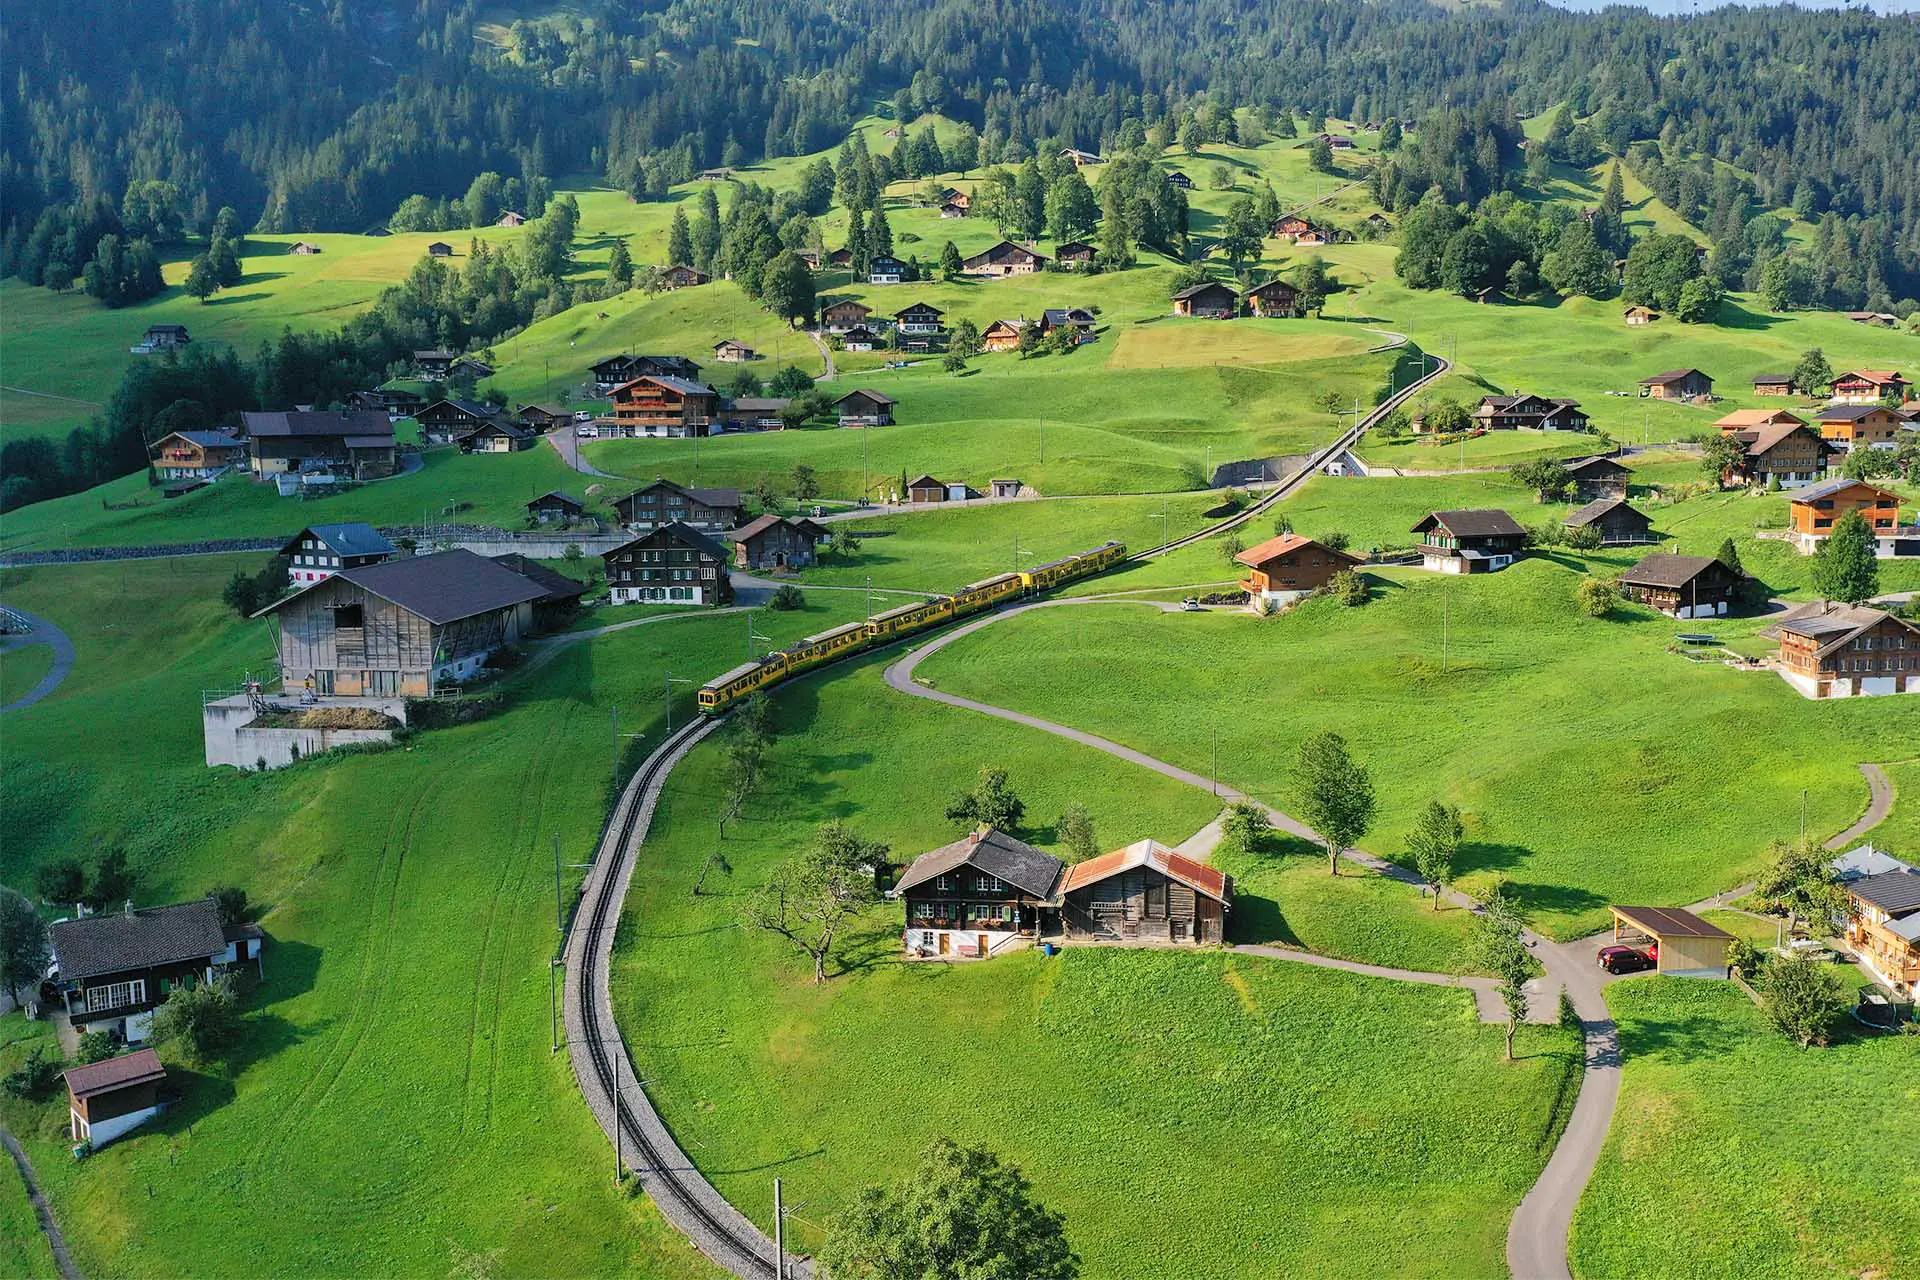 Exploring the Grindelwald region by train.